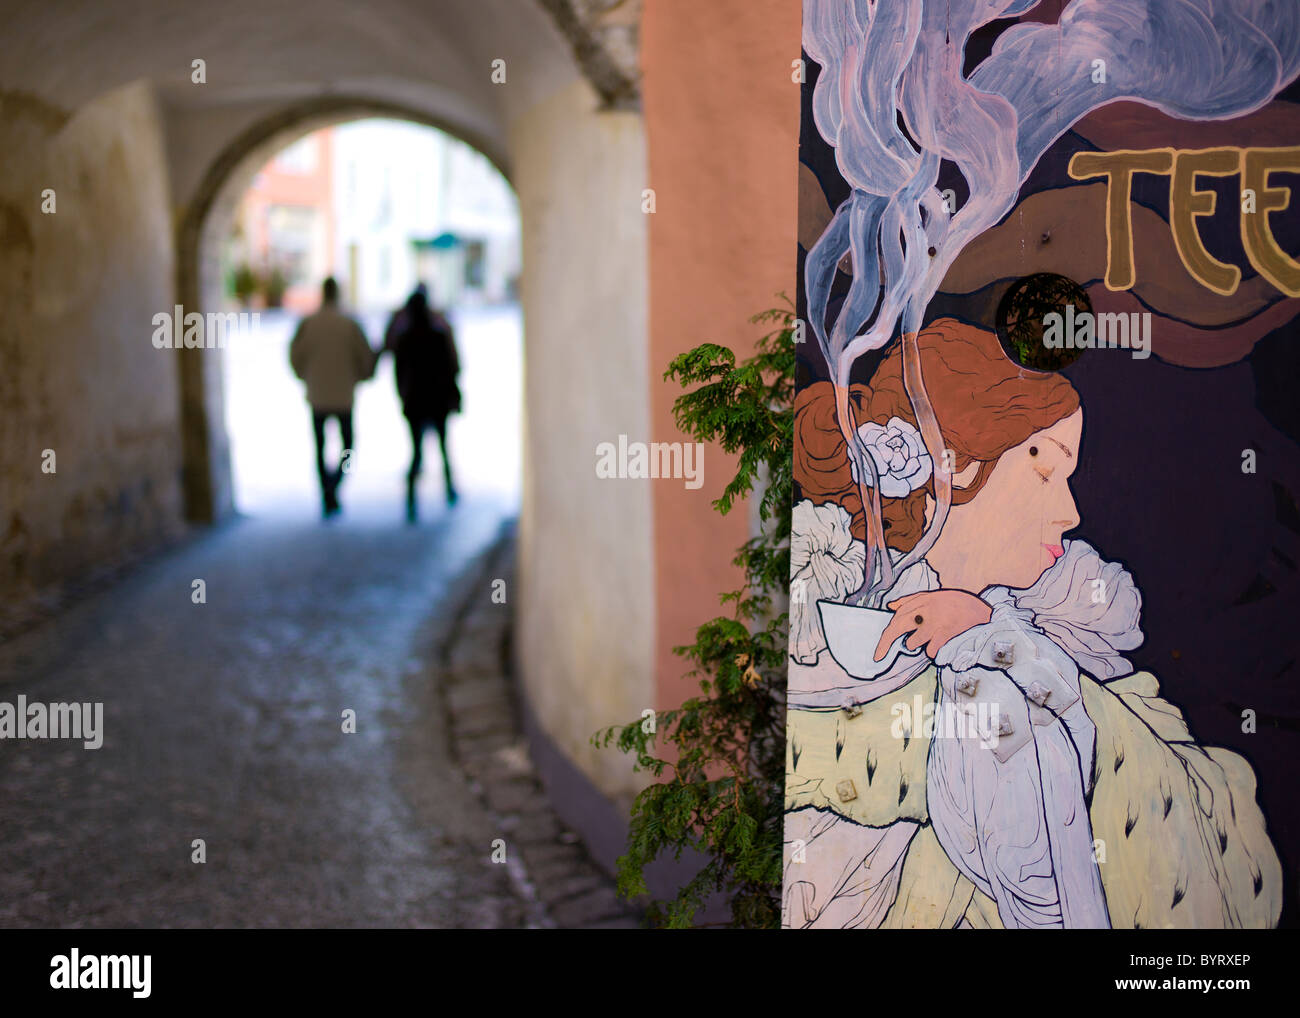 A Tallinn café sign with tourists walking through a passageway in the background Stock Photo